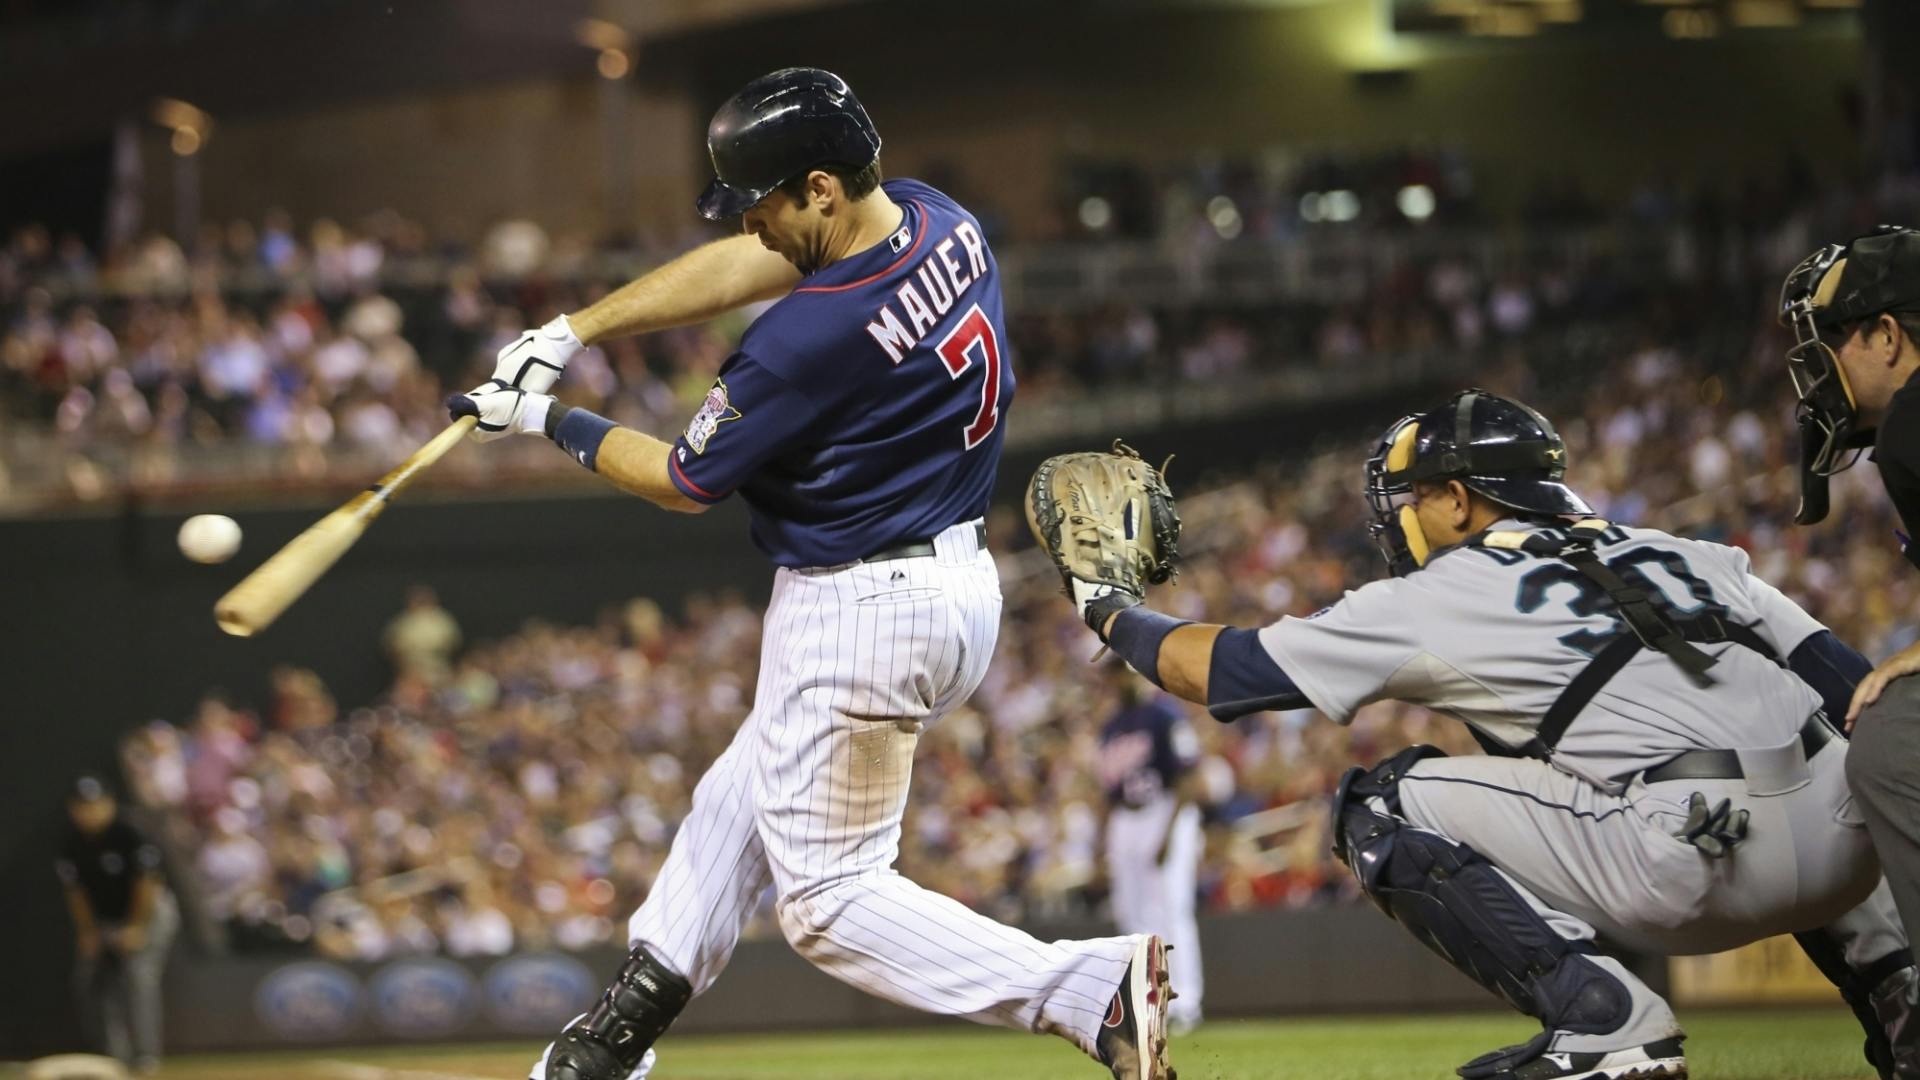 FOX Sports baseball reporter Ken Rosenthal wrote that the Twins placed Mauer on trade waivers Tuesday, "according to a major league source." Star Tribune reporter Michael Rand explains what this means for Mauer's future.